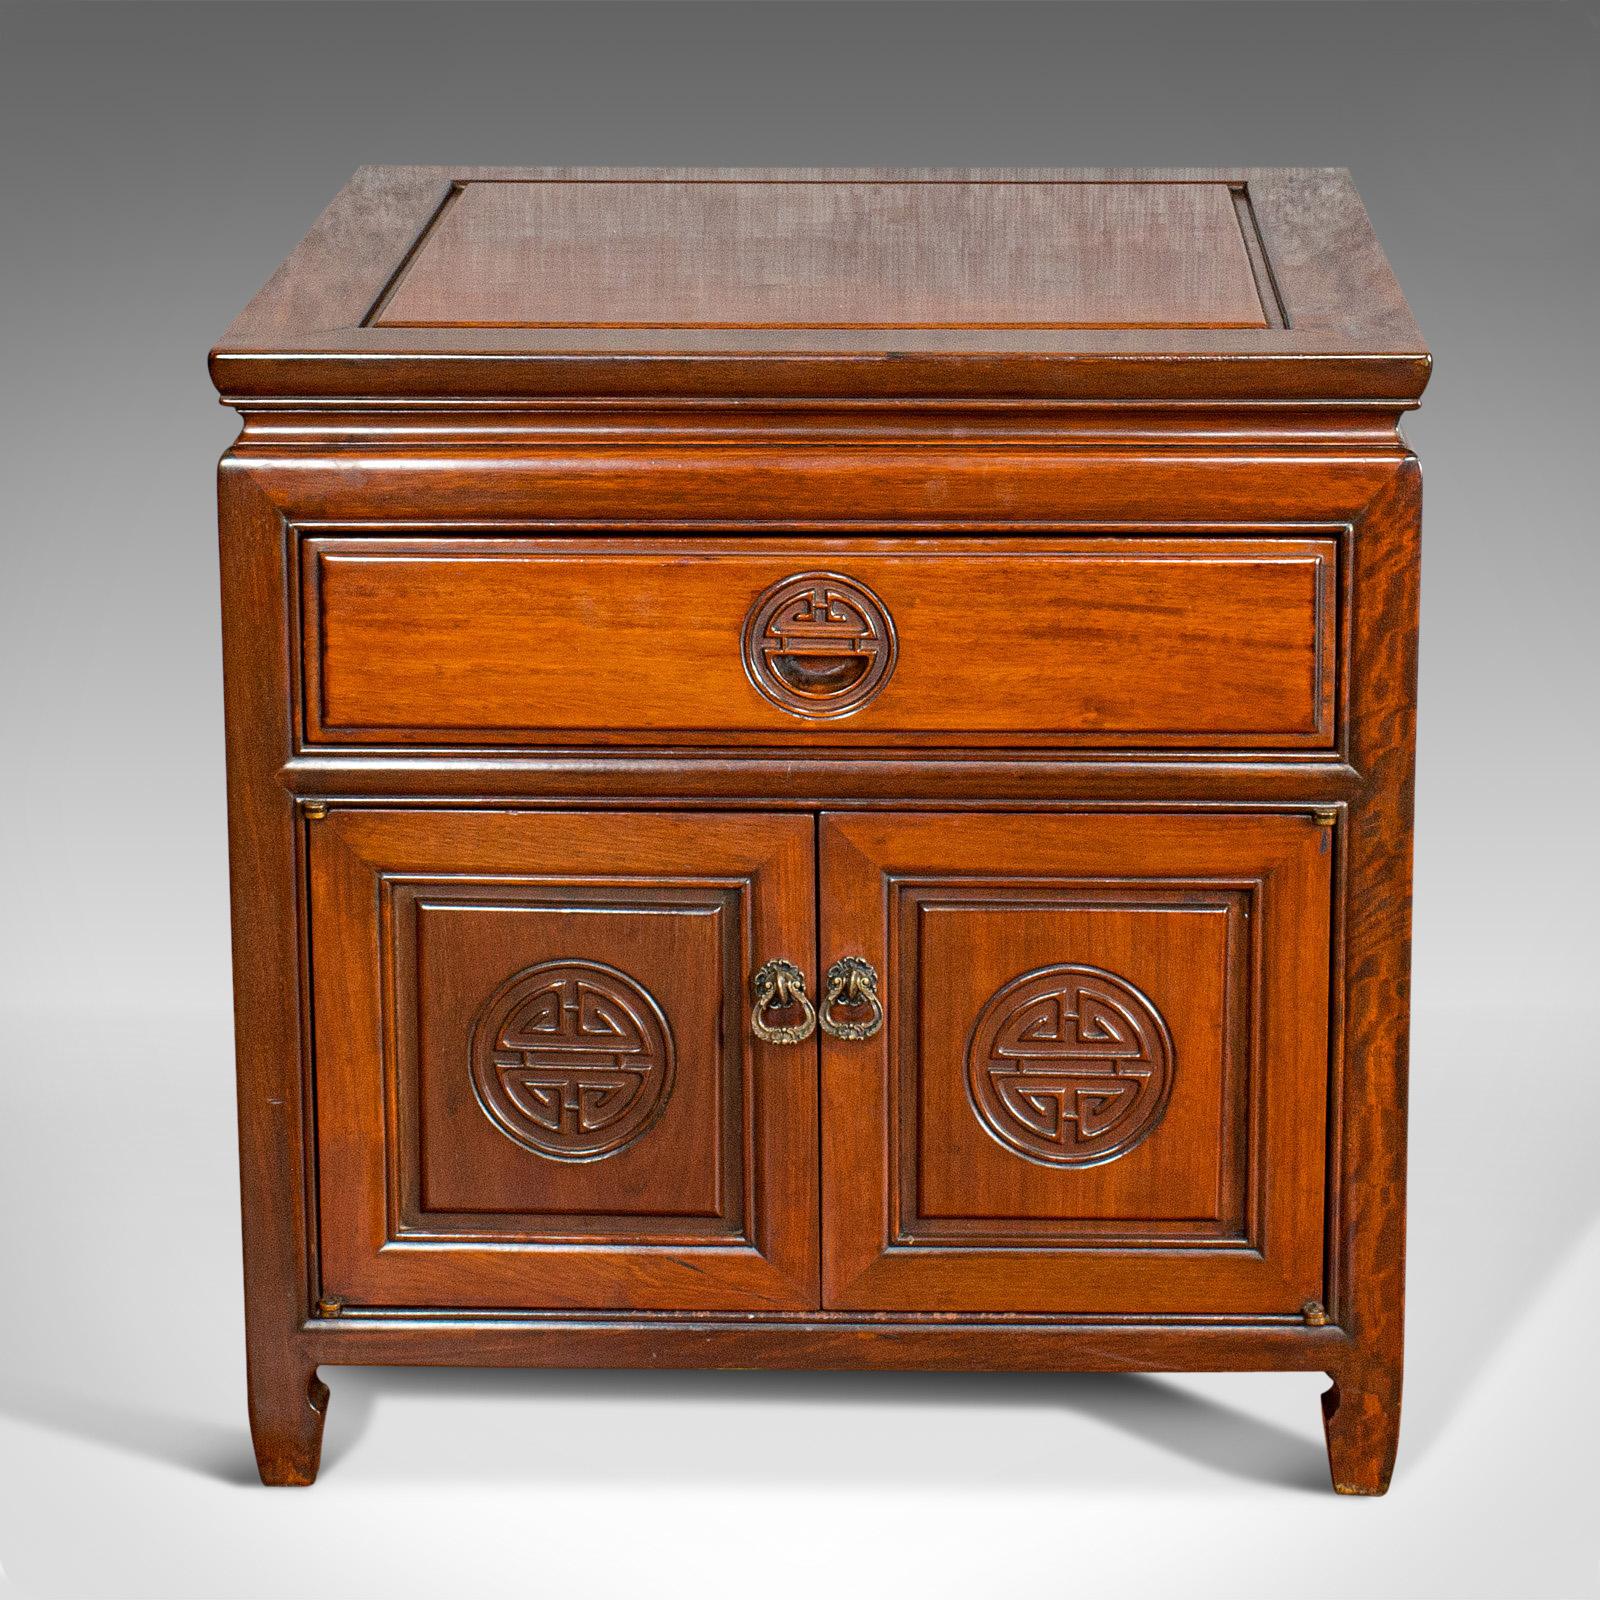 This is a vintage bedside cabinet. An Asian, teak low side stand, dating to the late 20th century, circa 1990.

Pleasingly square proportions
Displaying a desirable aged patina
Quality teak shows fine grain interest
Rich russet hues to the wax